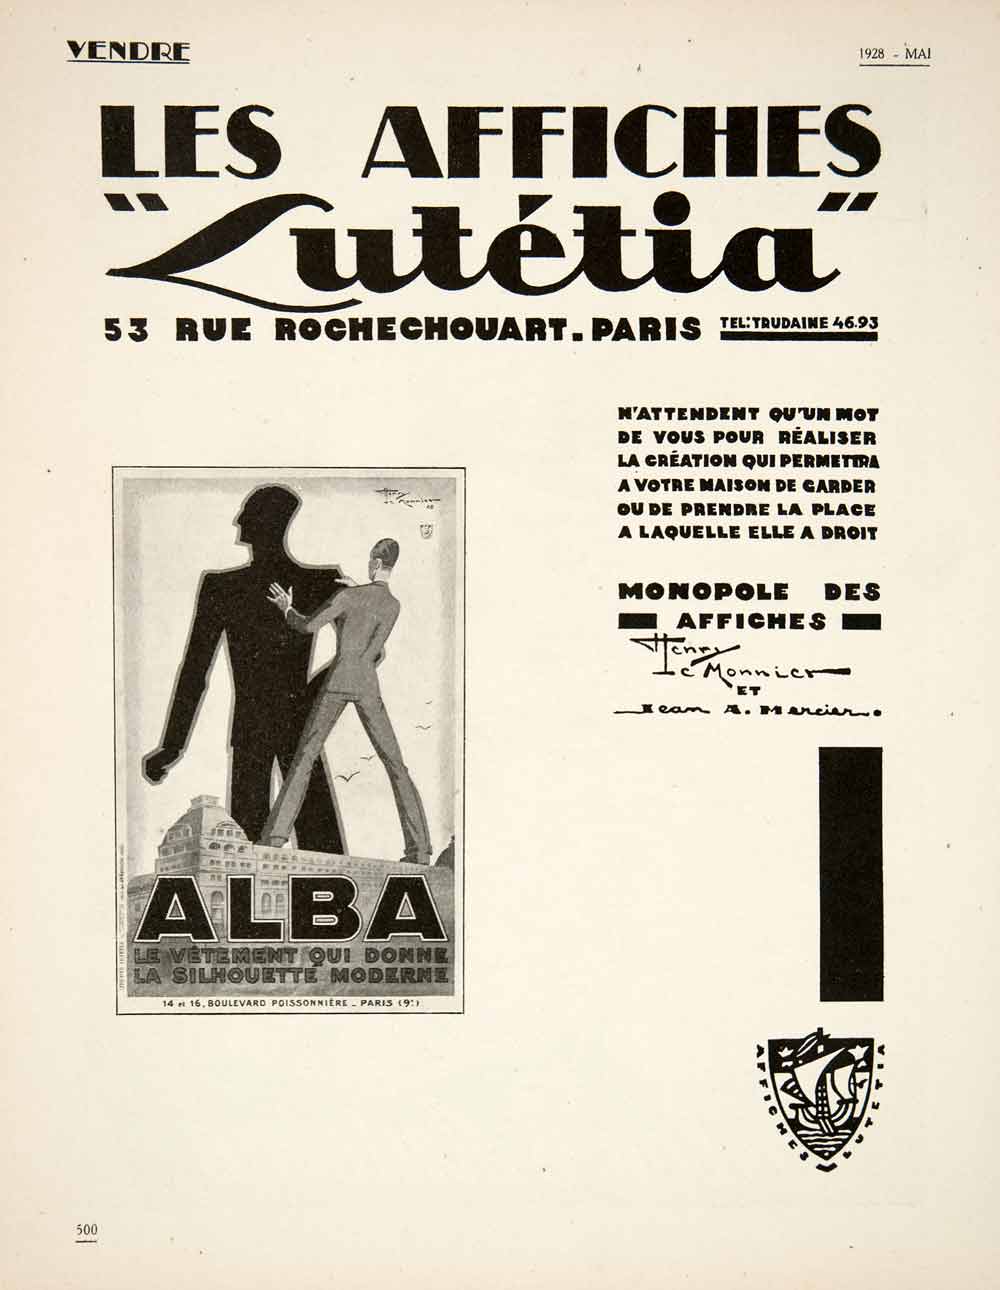 1928 Ad Vintage French Art Deco Affiches Lutetia Advertising Agengy Paris VEN5